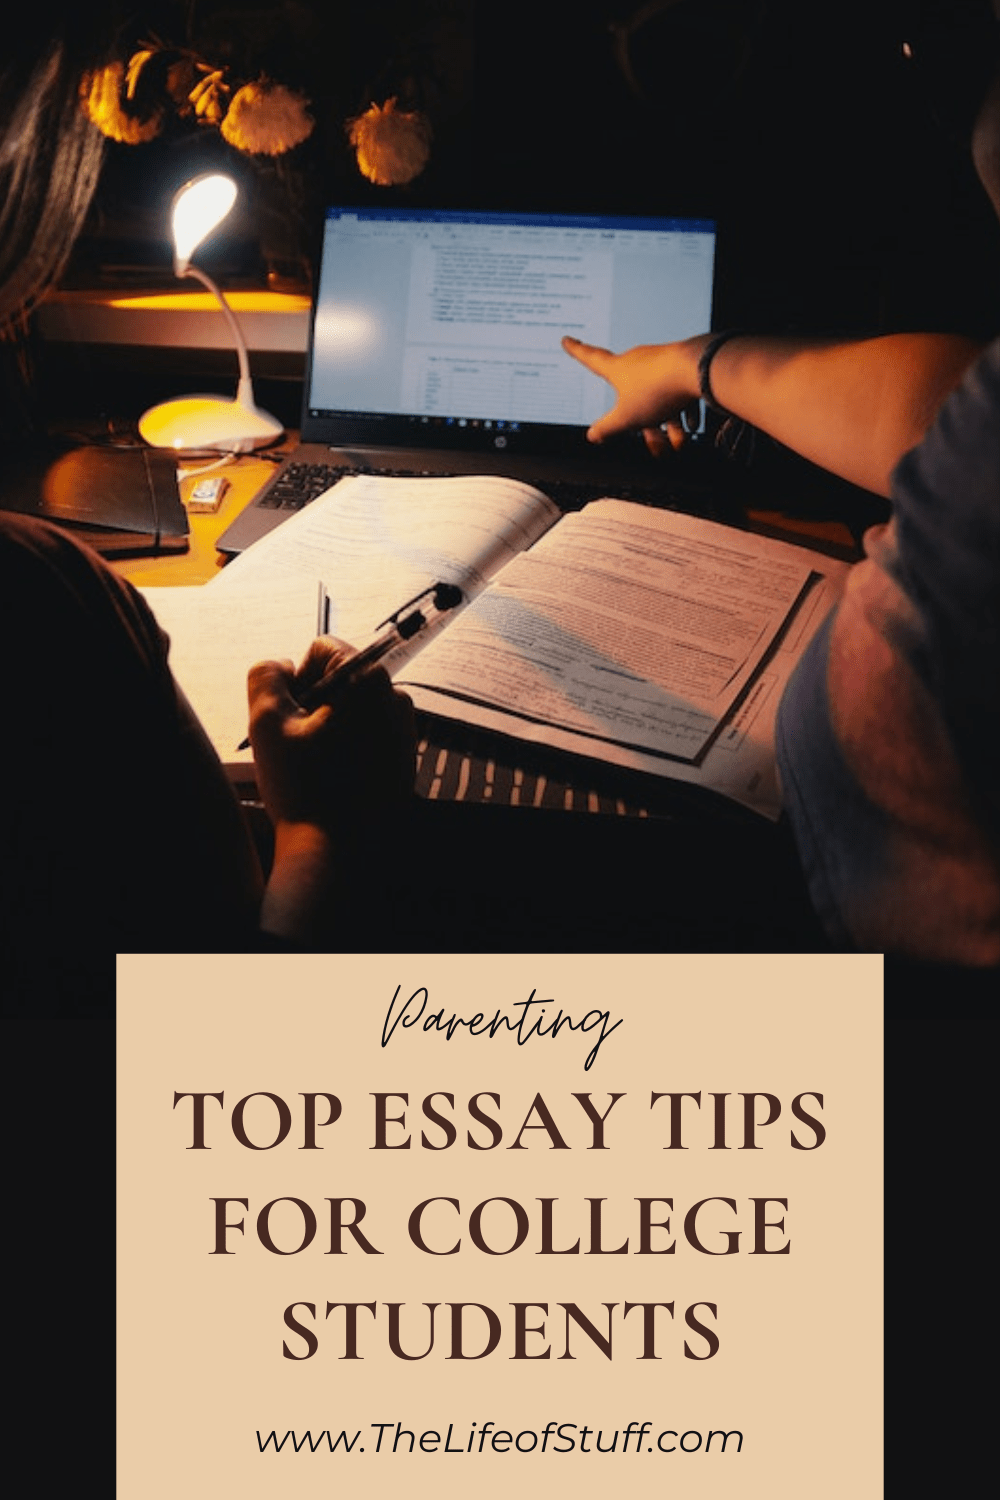 Parenting - 5 Top Essay Tips For College Students - The Life of Stuff